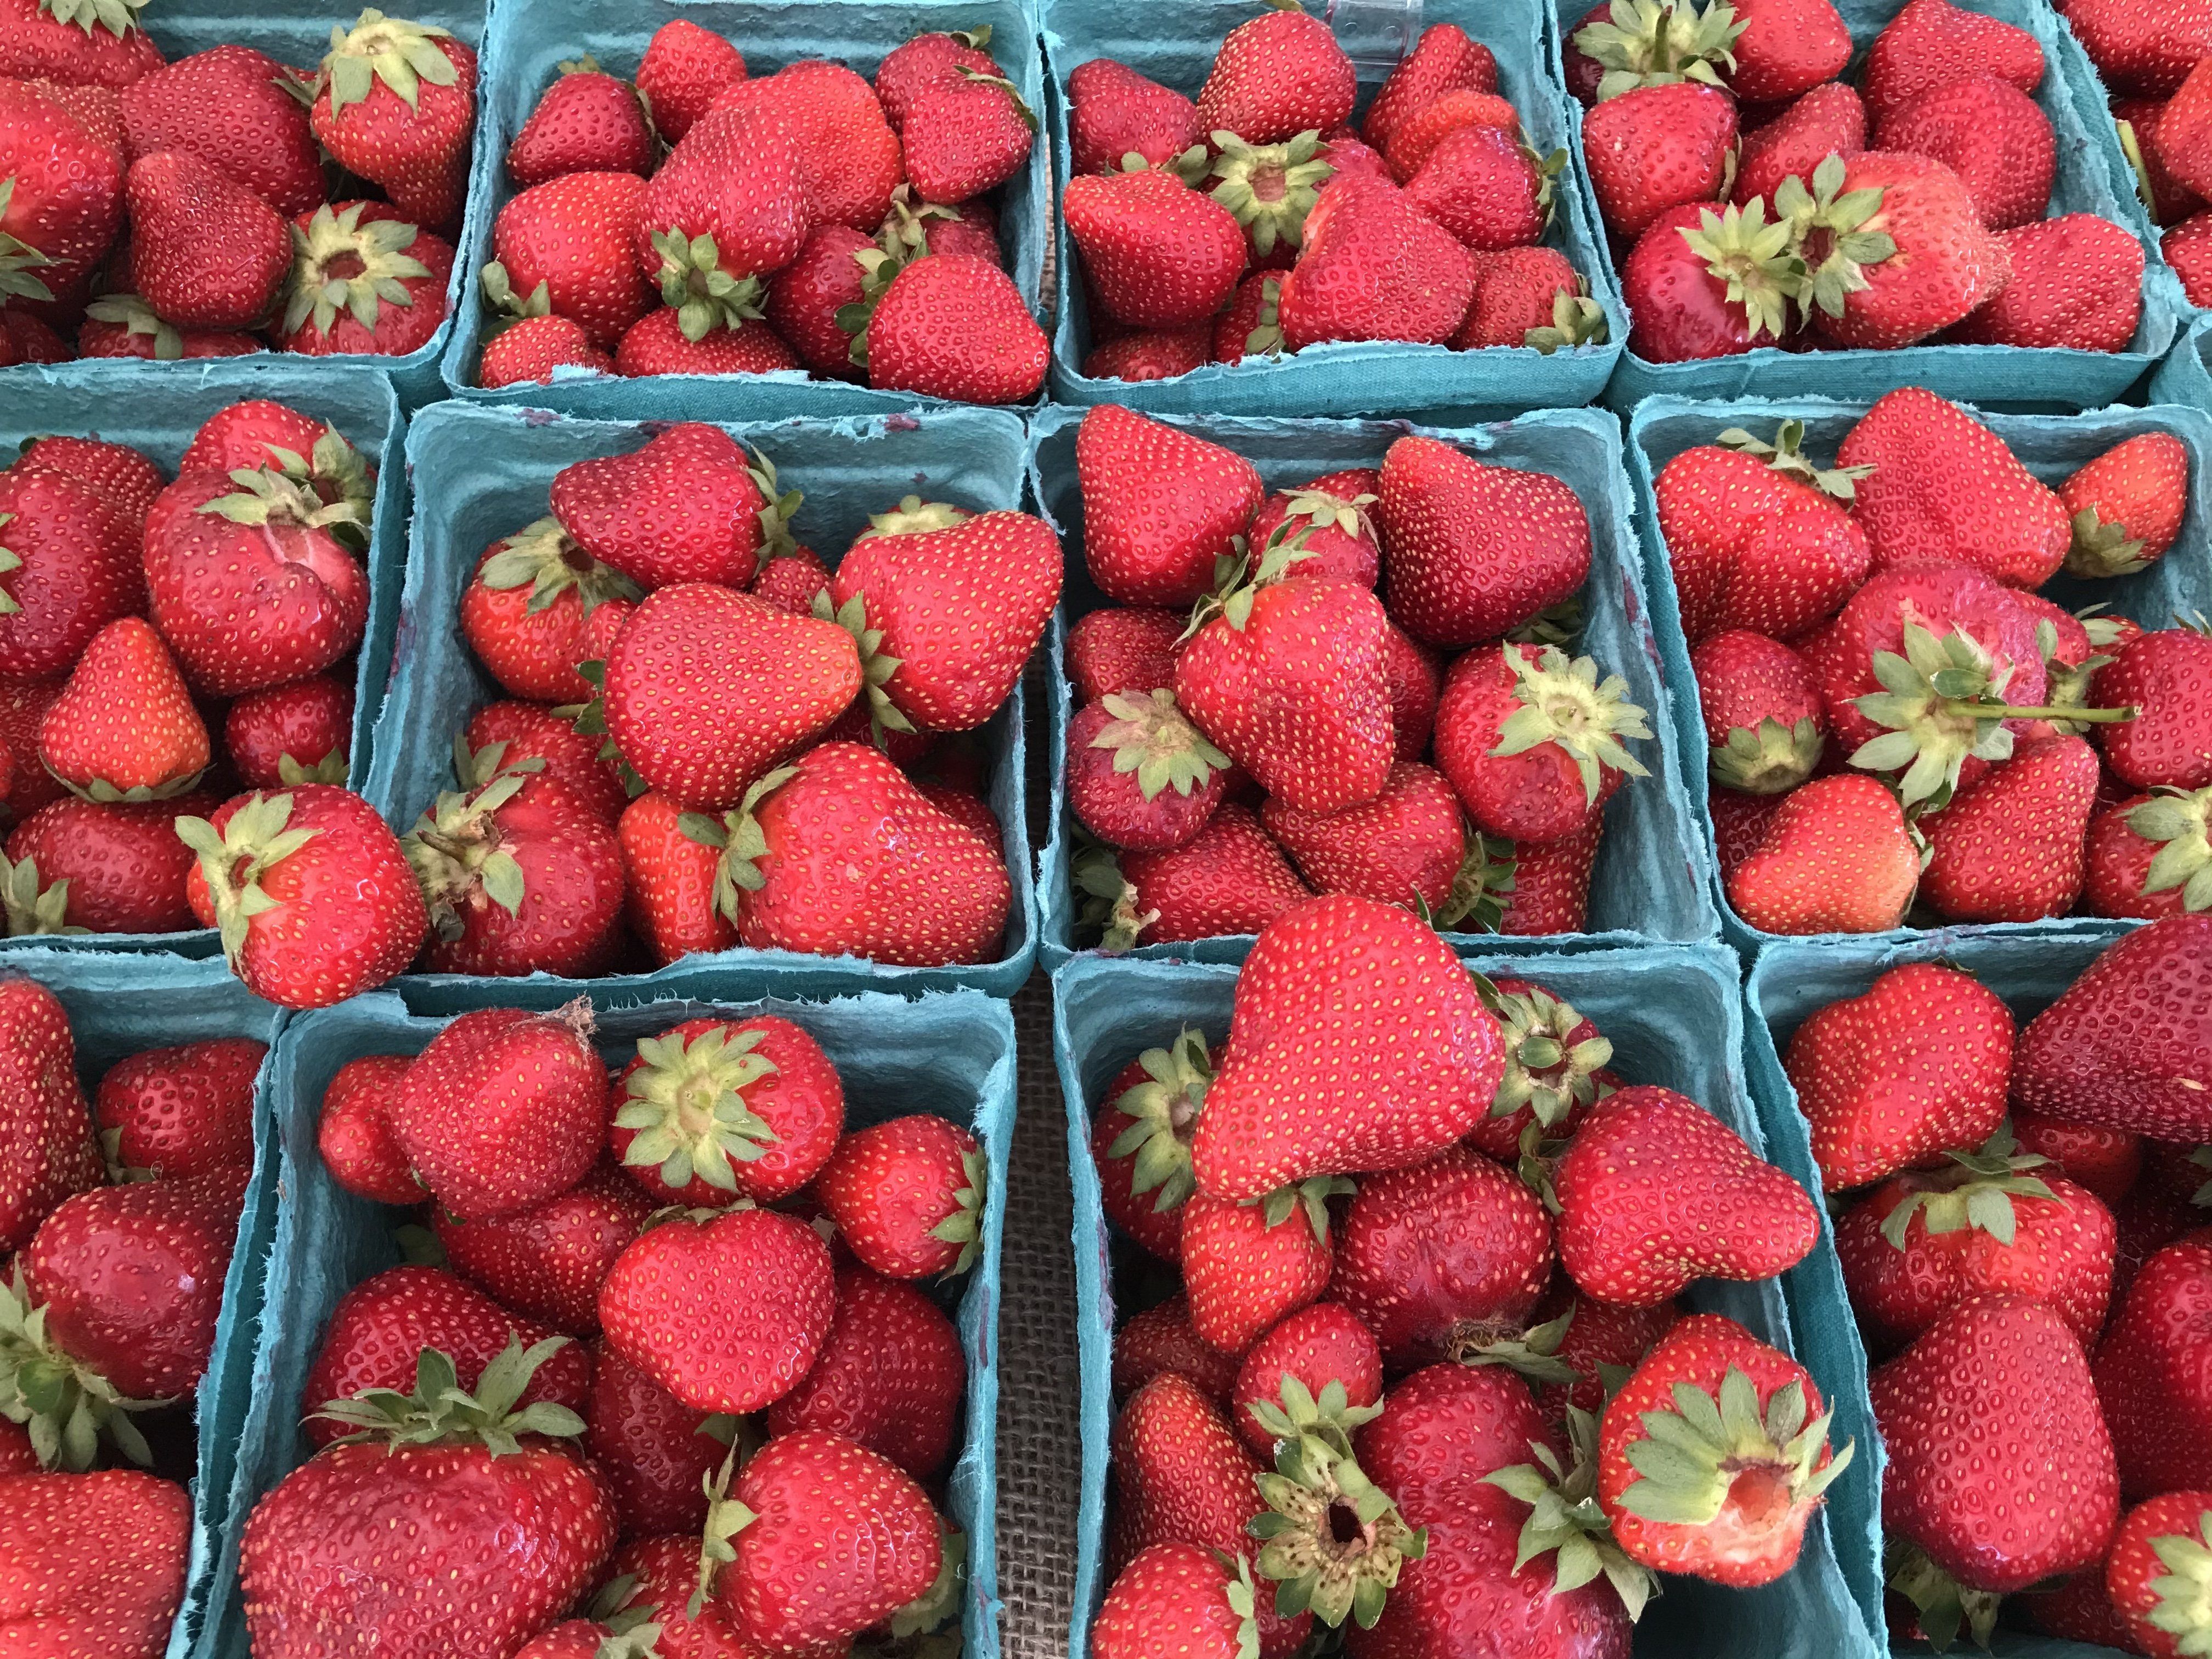 Next Happening: Central Oregon Strawberry Season is Upon us